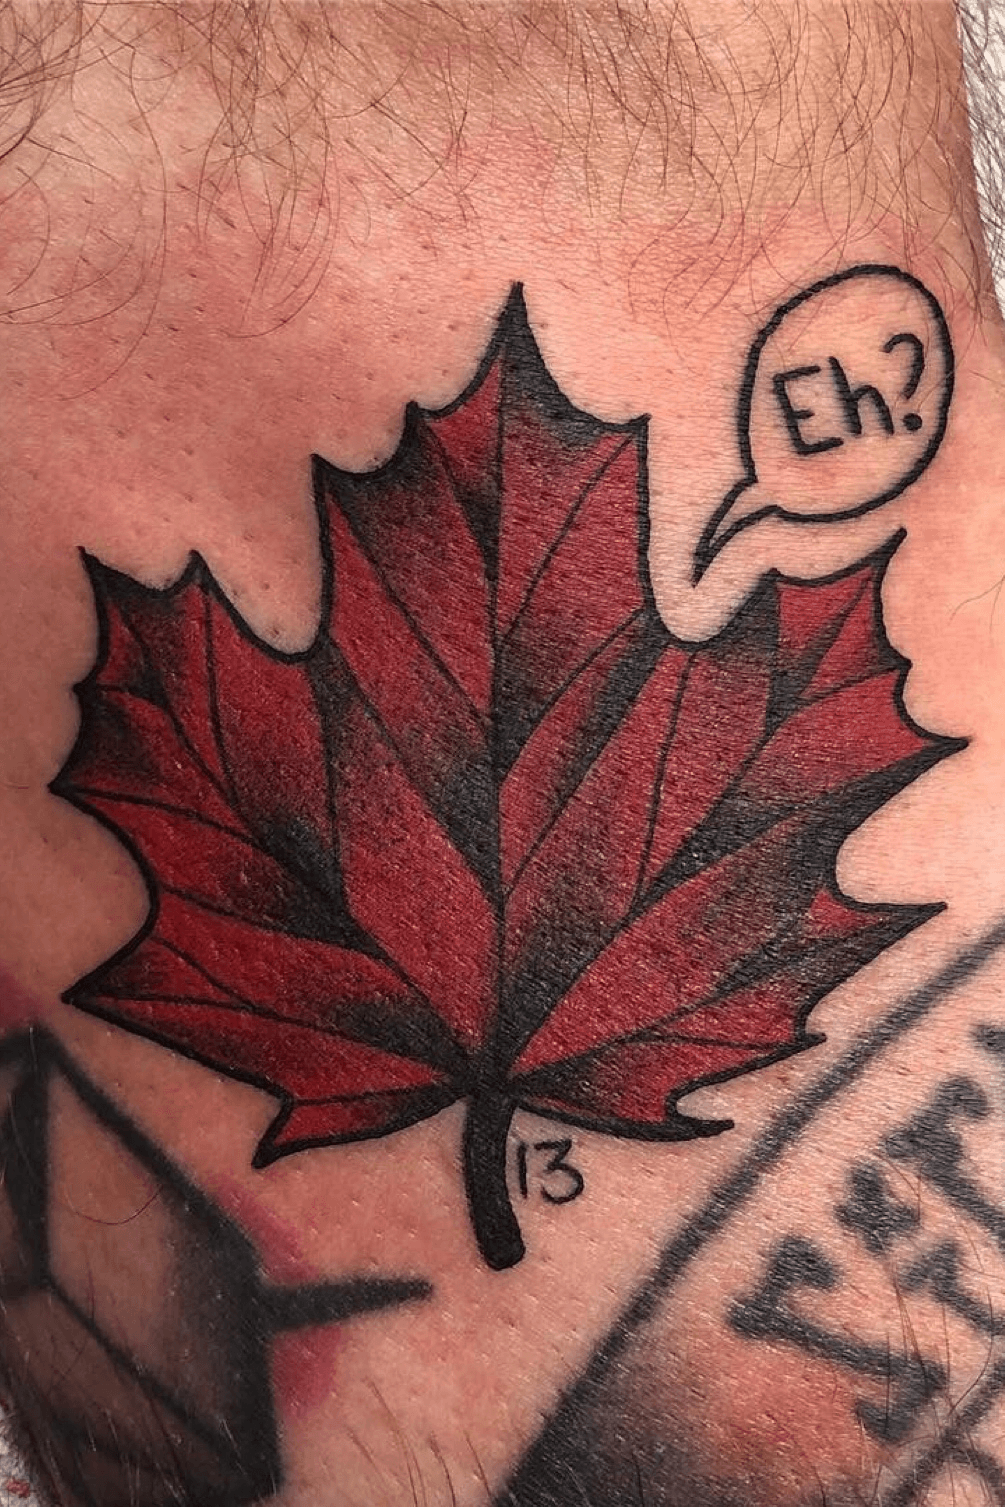 First tattoo Maple leaf done on Canada Day By Chad Wilson at Eternal Ink  in Edmonton Alberta  rtattoos